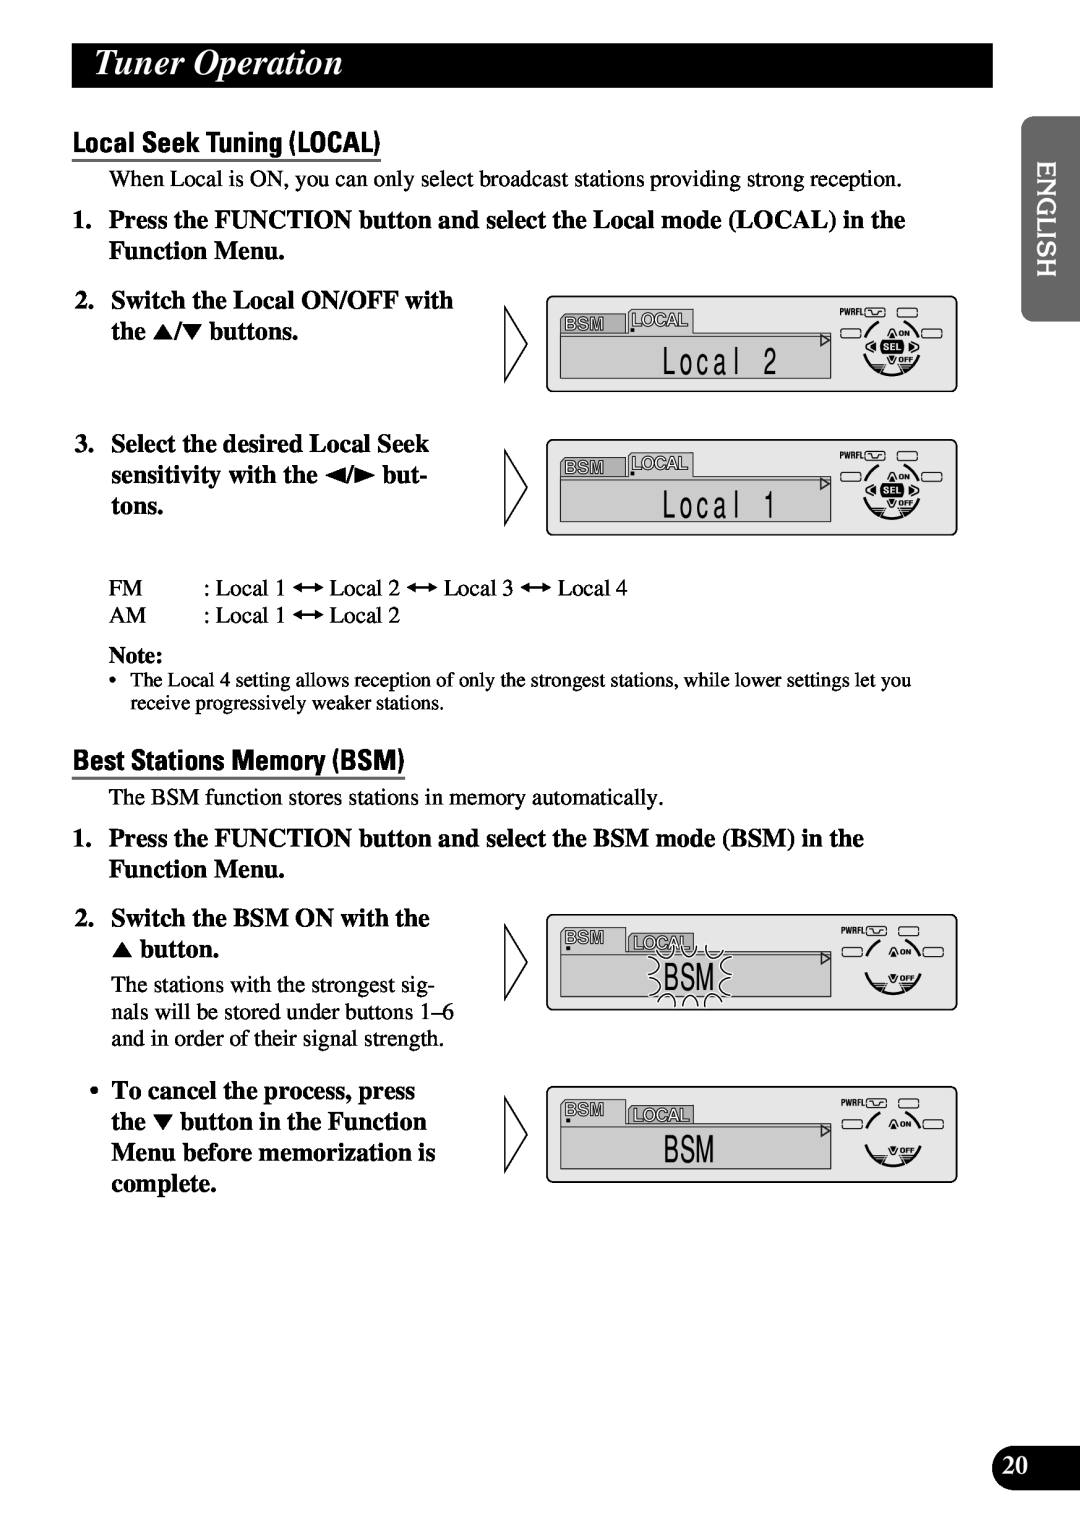 Pioneer DEH-P6300 Tuner Operation, Local Seek Tuning LOCAL, Best Stations Memory BSM, Switch the BSM ON with the 5 button 